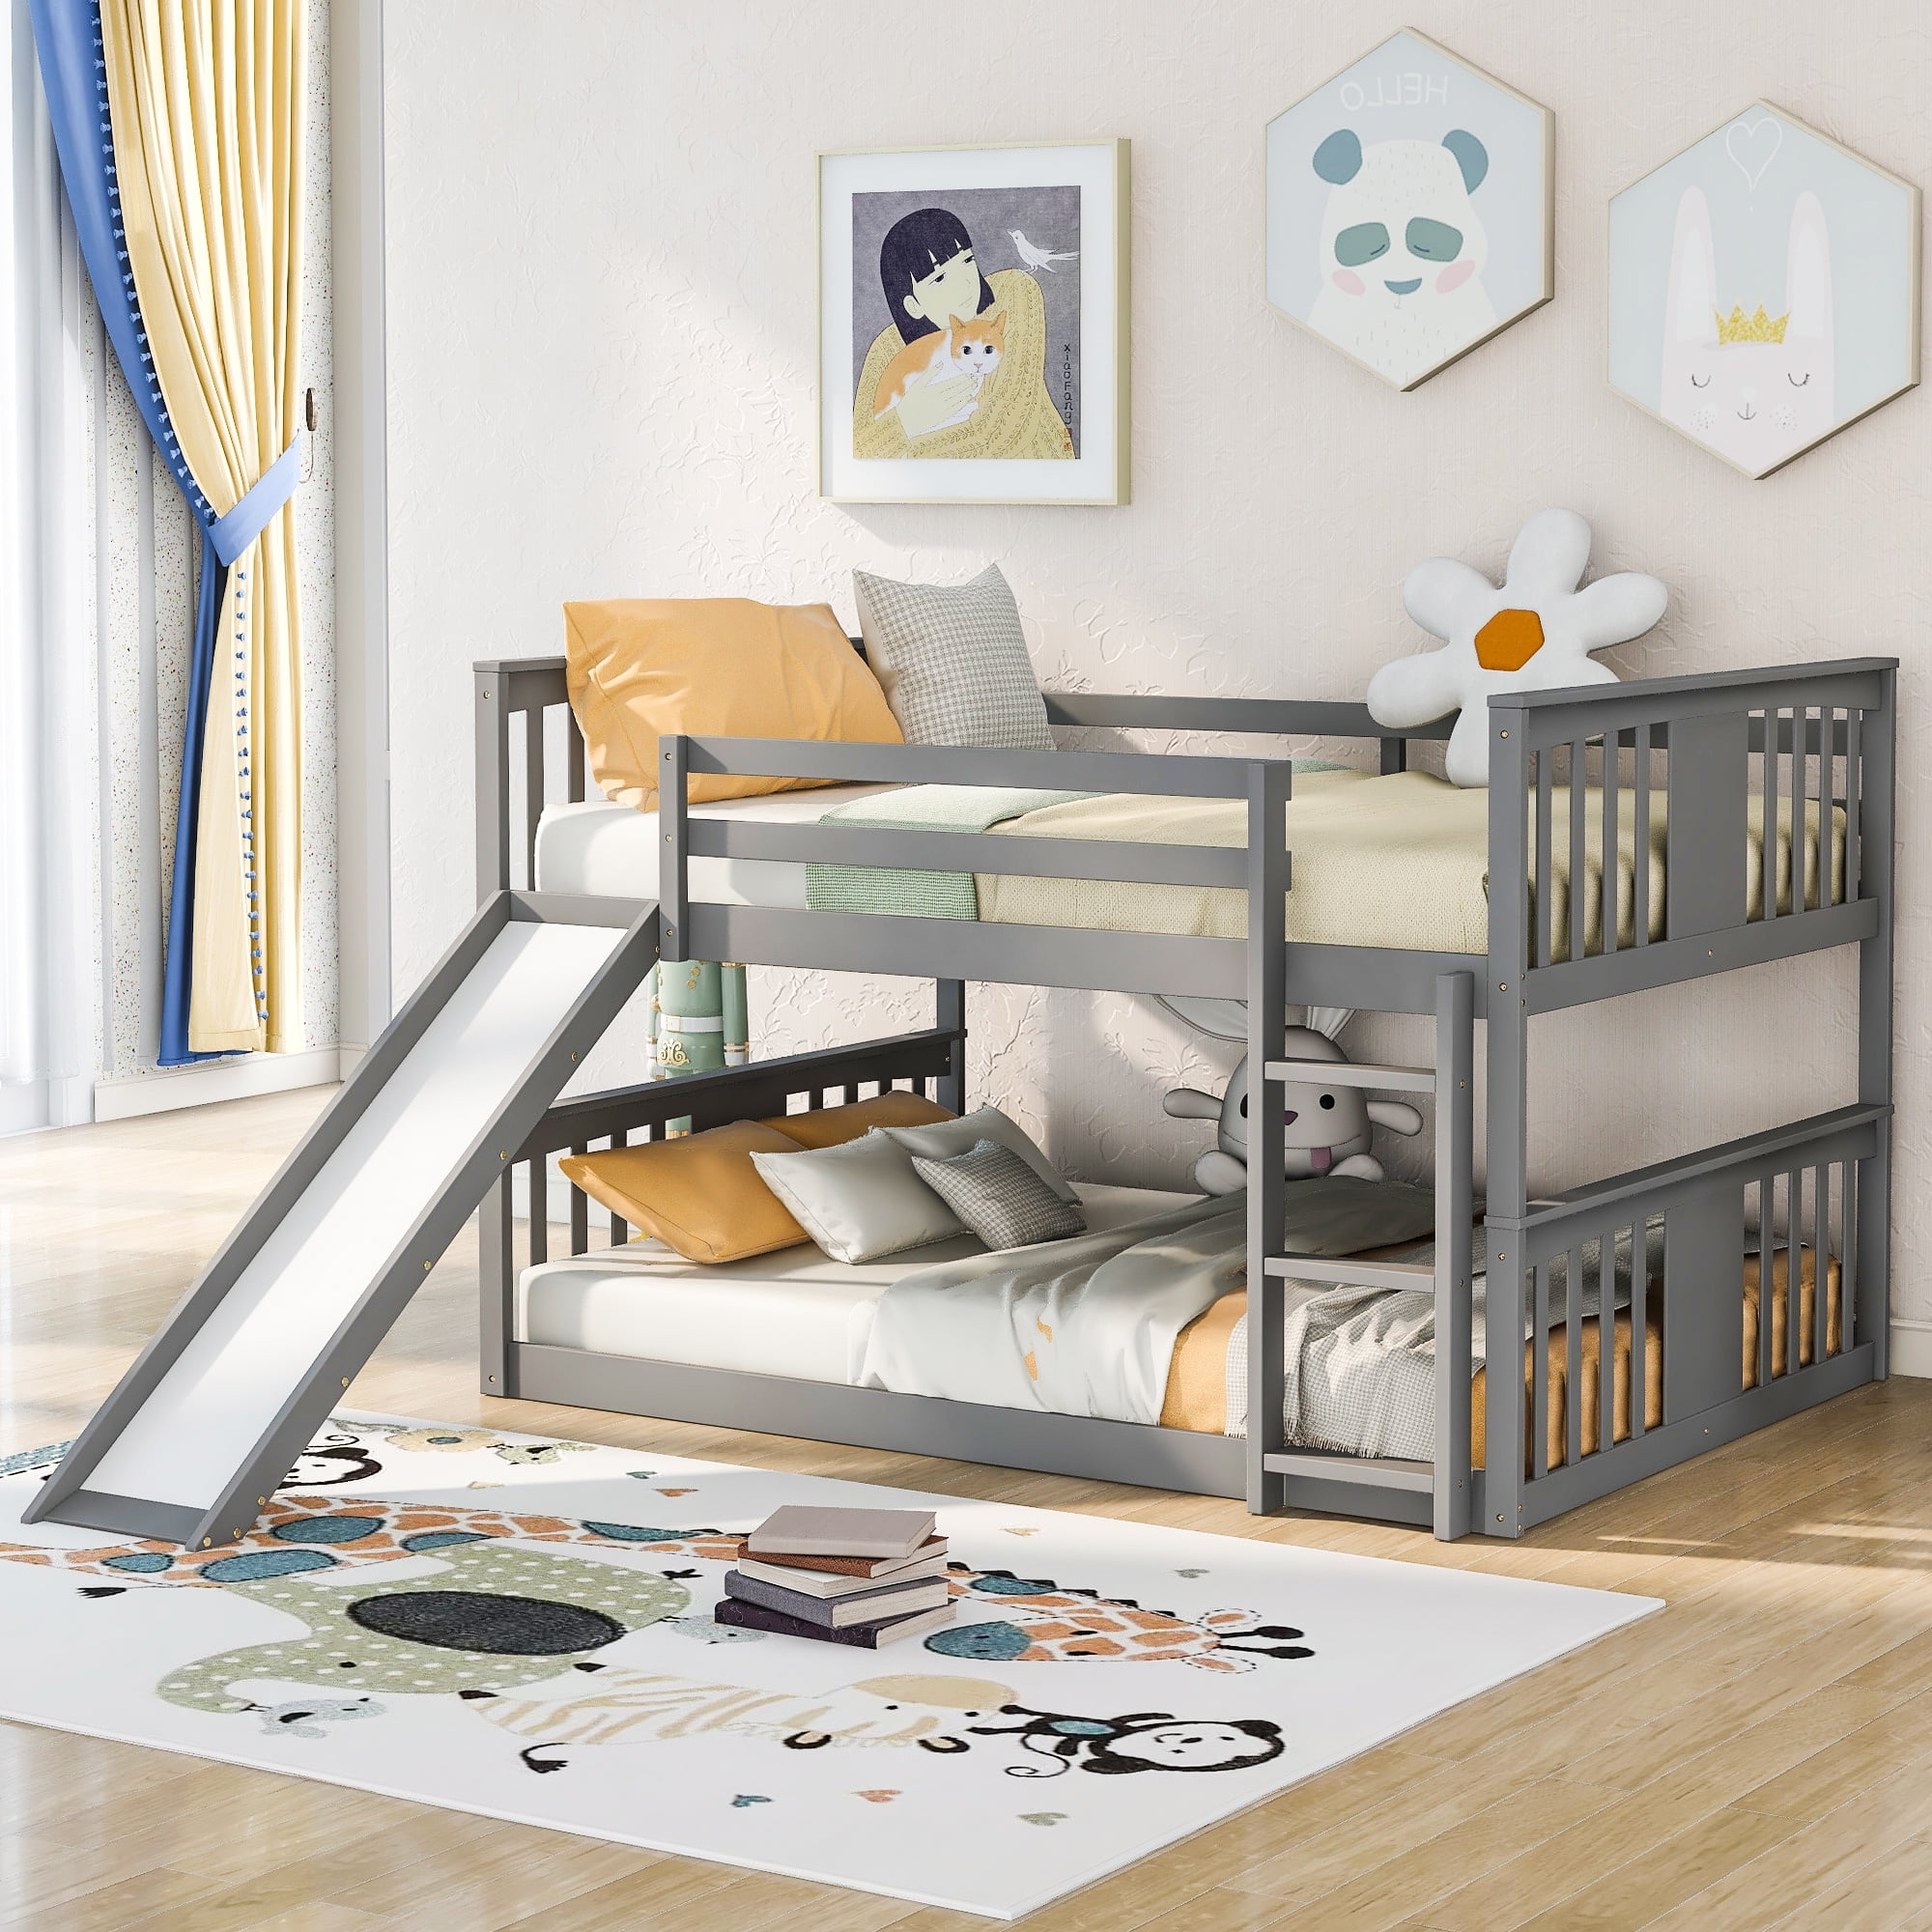 Kids Toddler Floor Bunk Bed, Zachary Kids Bunk Bed Twin Over Full With Storage